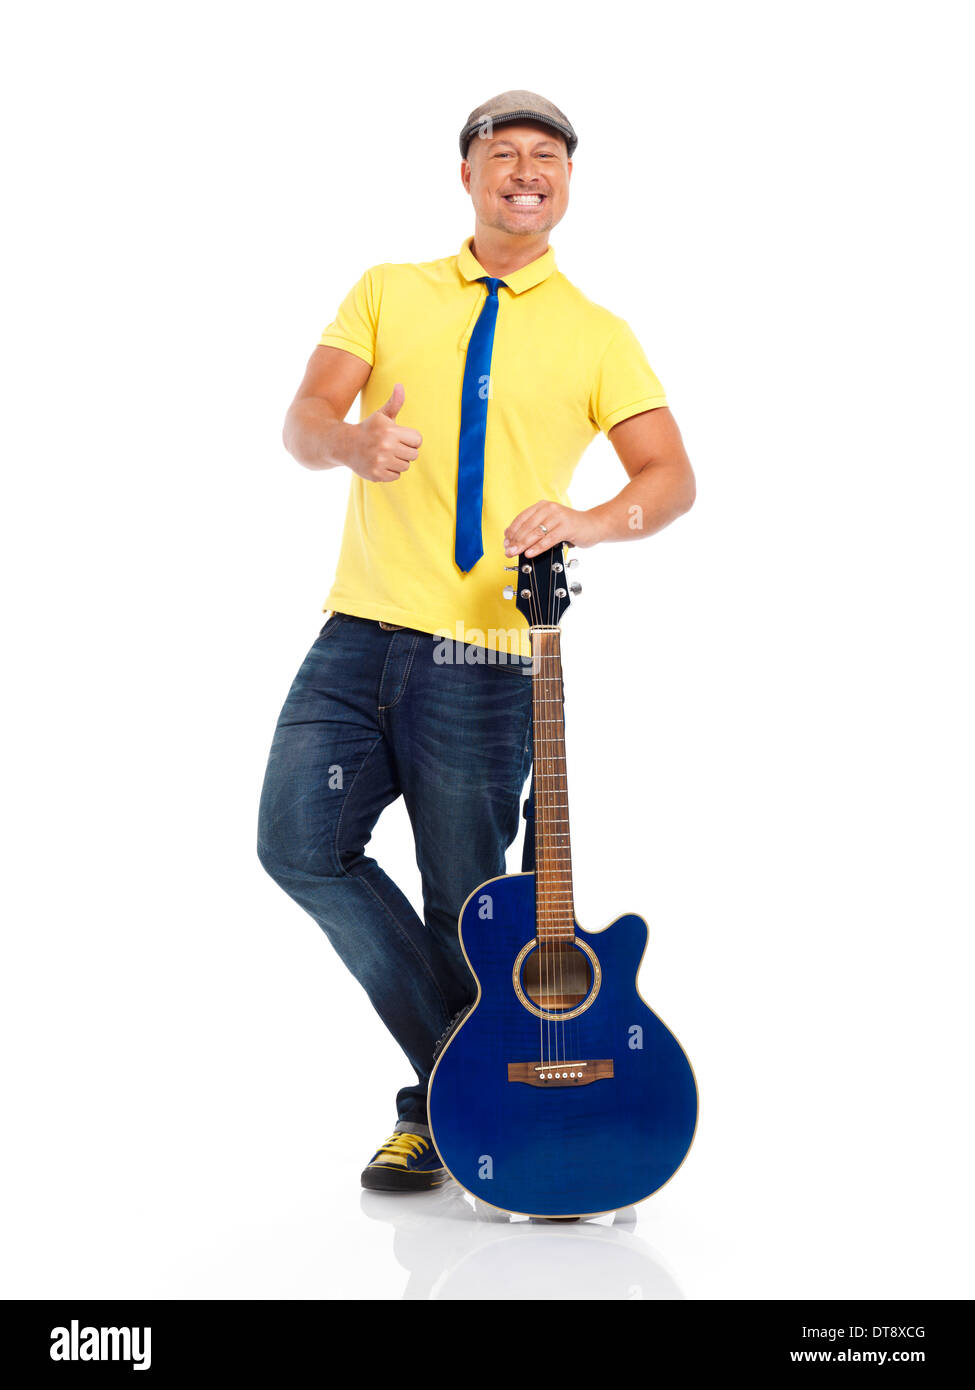 Portrait of a happy smiling young man guitar player standing with an acoustic guitar isolated on white background Stock Photo